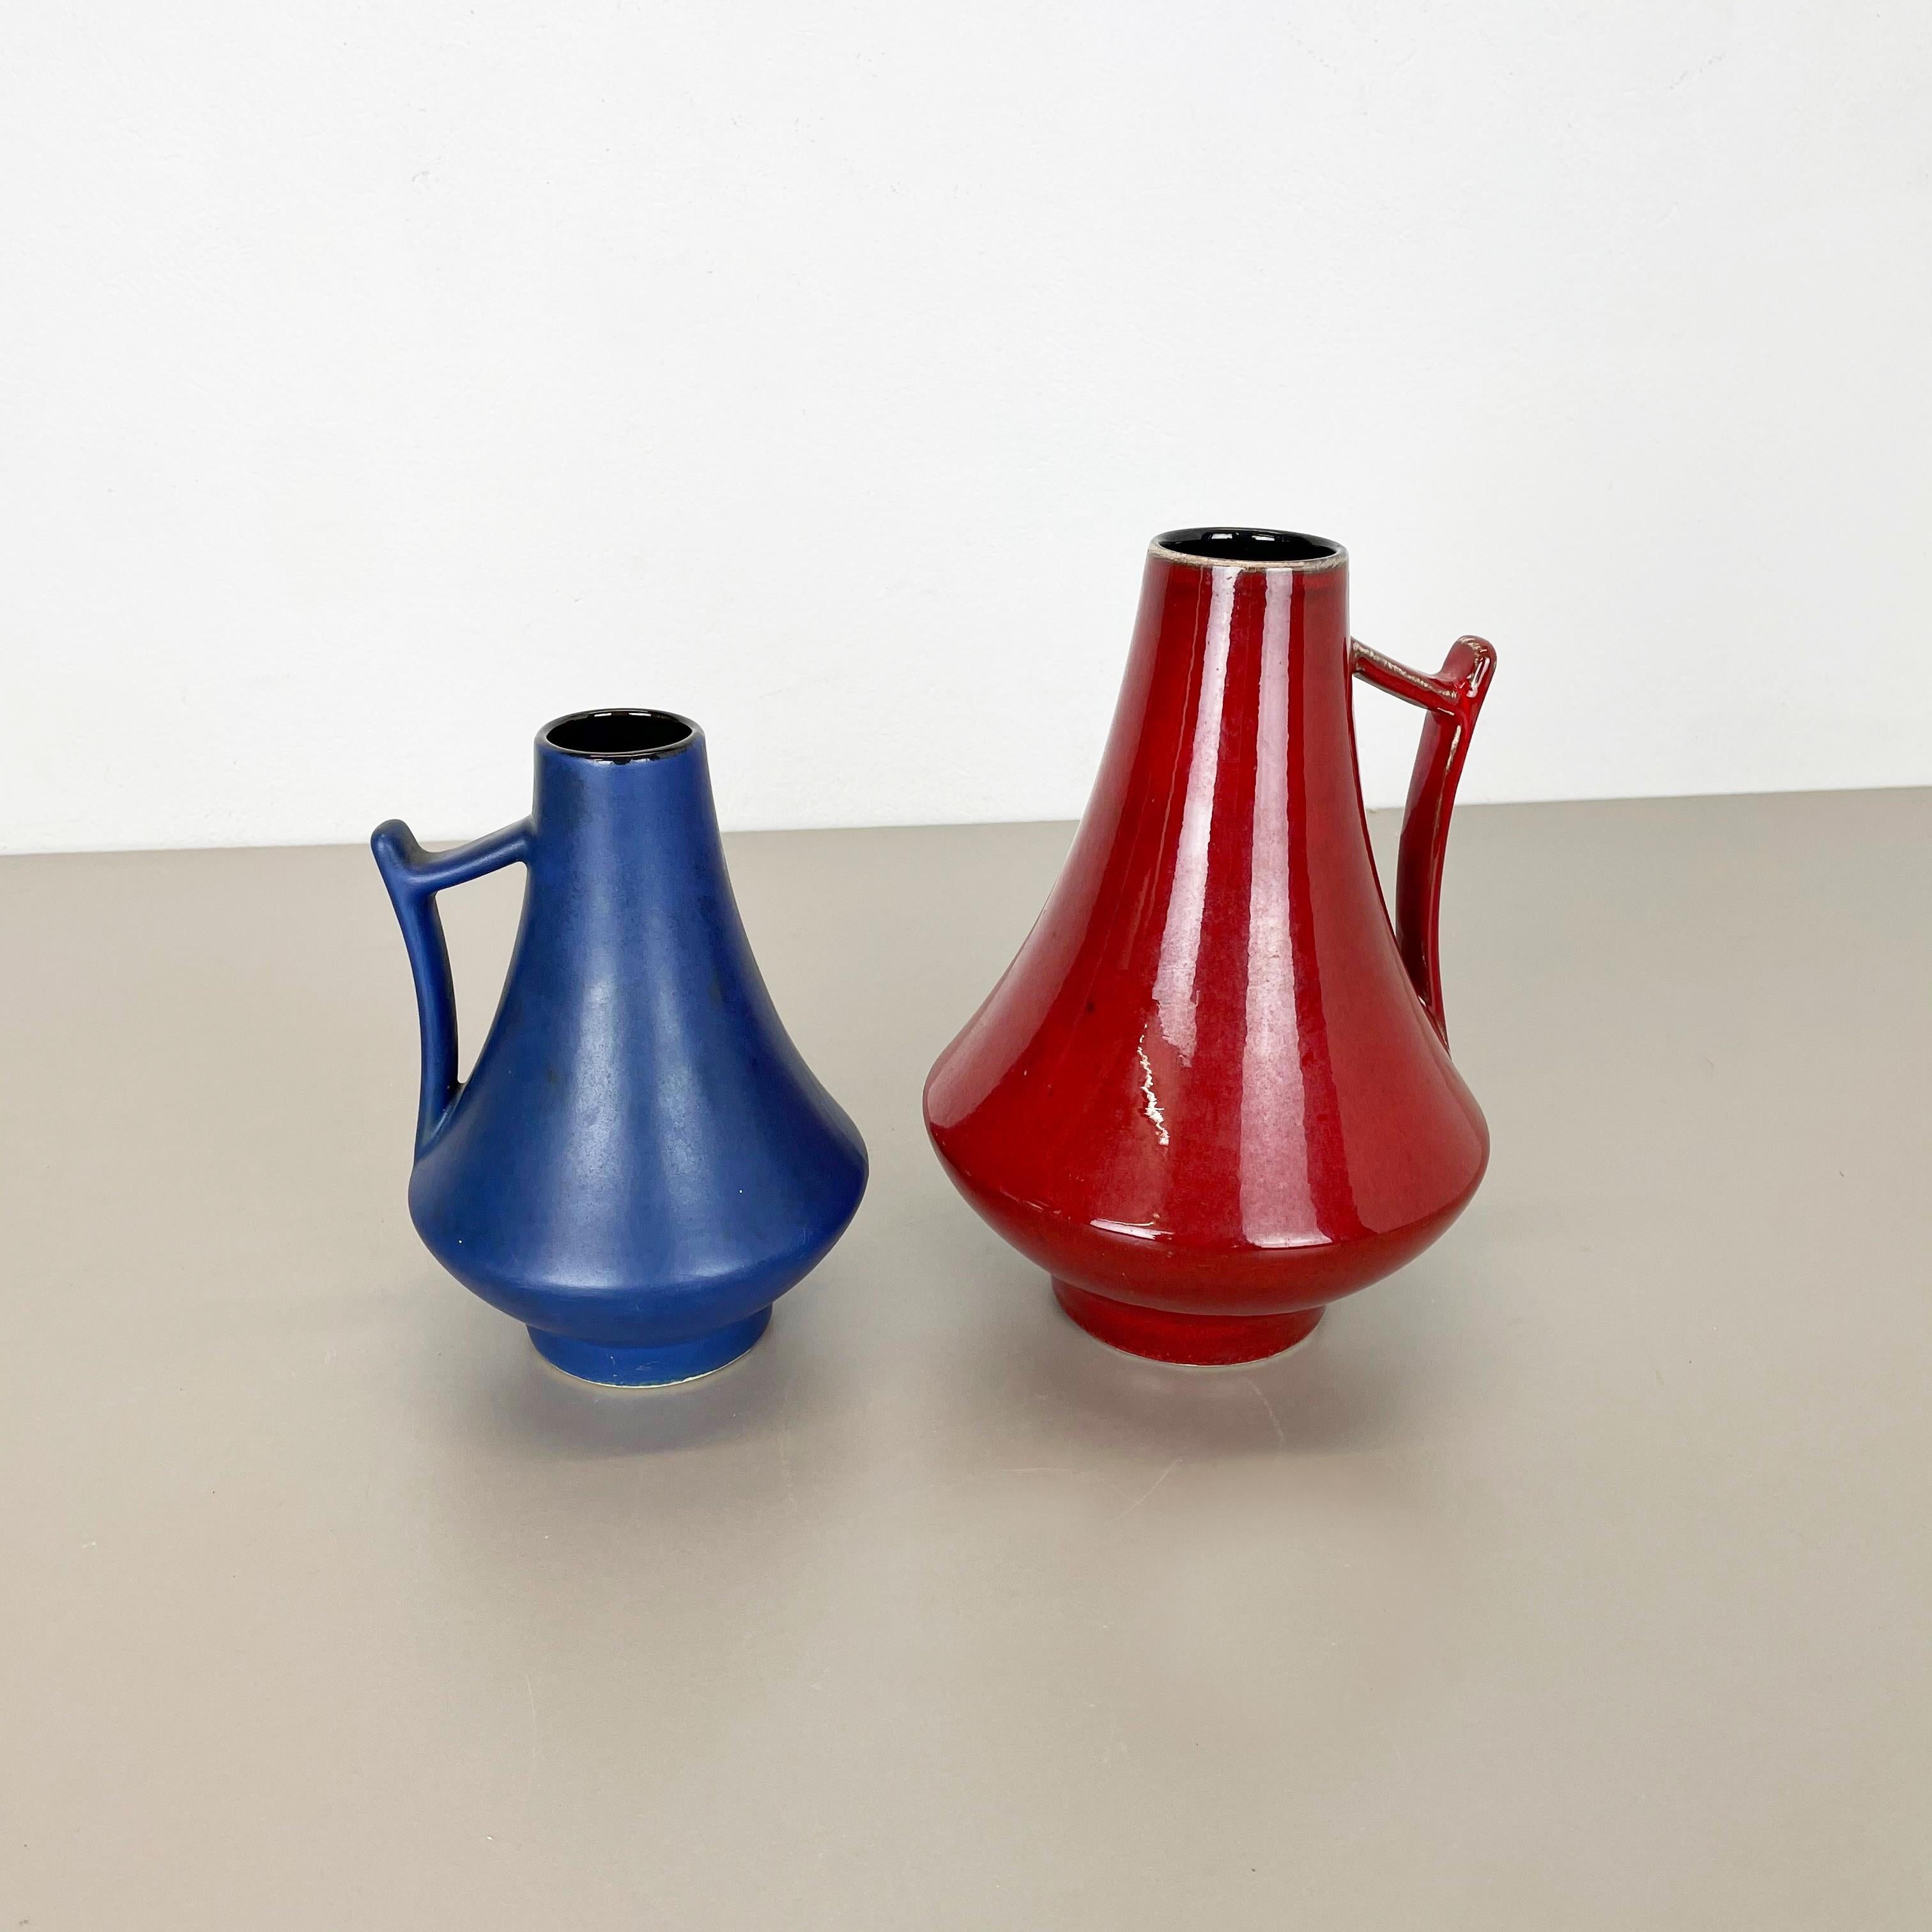 Article:

Set of two fat lava art vases

Model:
44/25 
44/20



Producer:

Jopeko Ceramics, Germany



Decade:

1970s




These original vintage vases was produced in the 1970s in Germany. It is made of ceramic pottery in fat